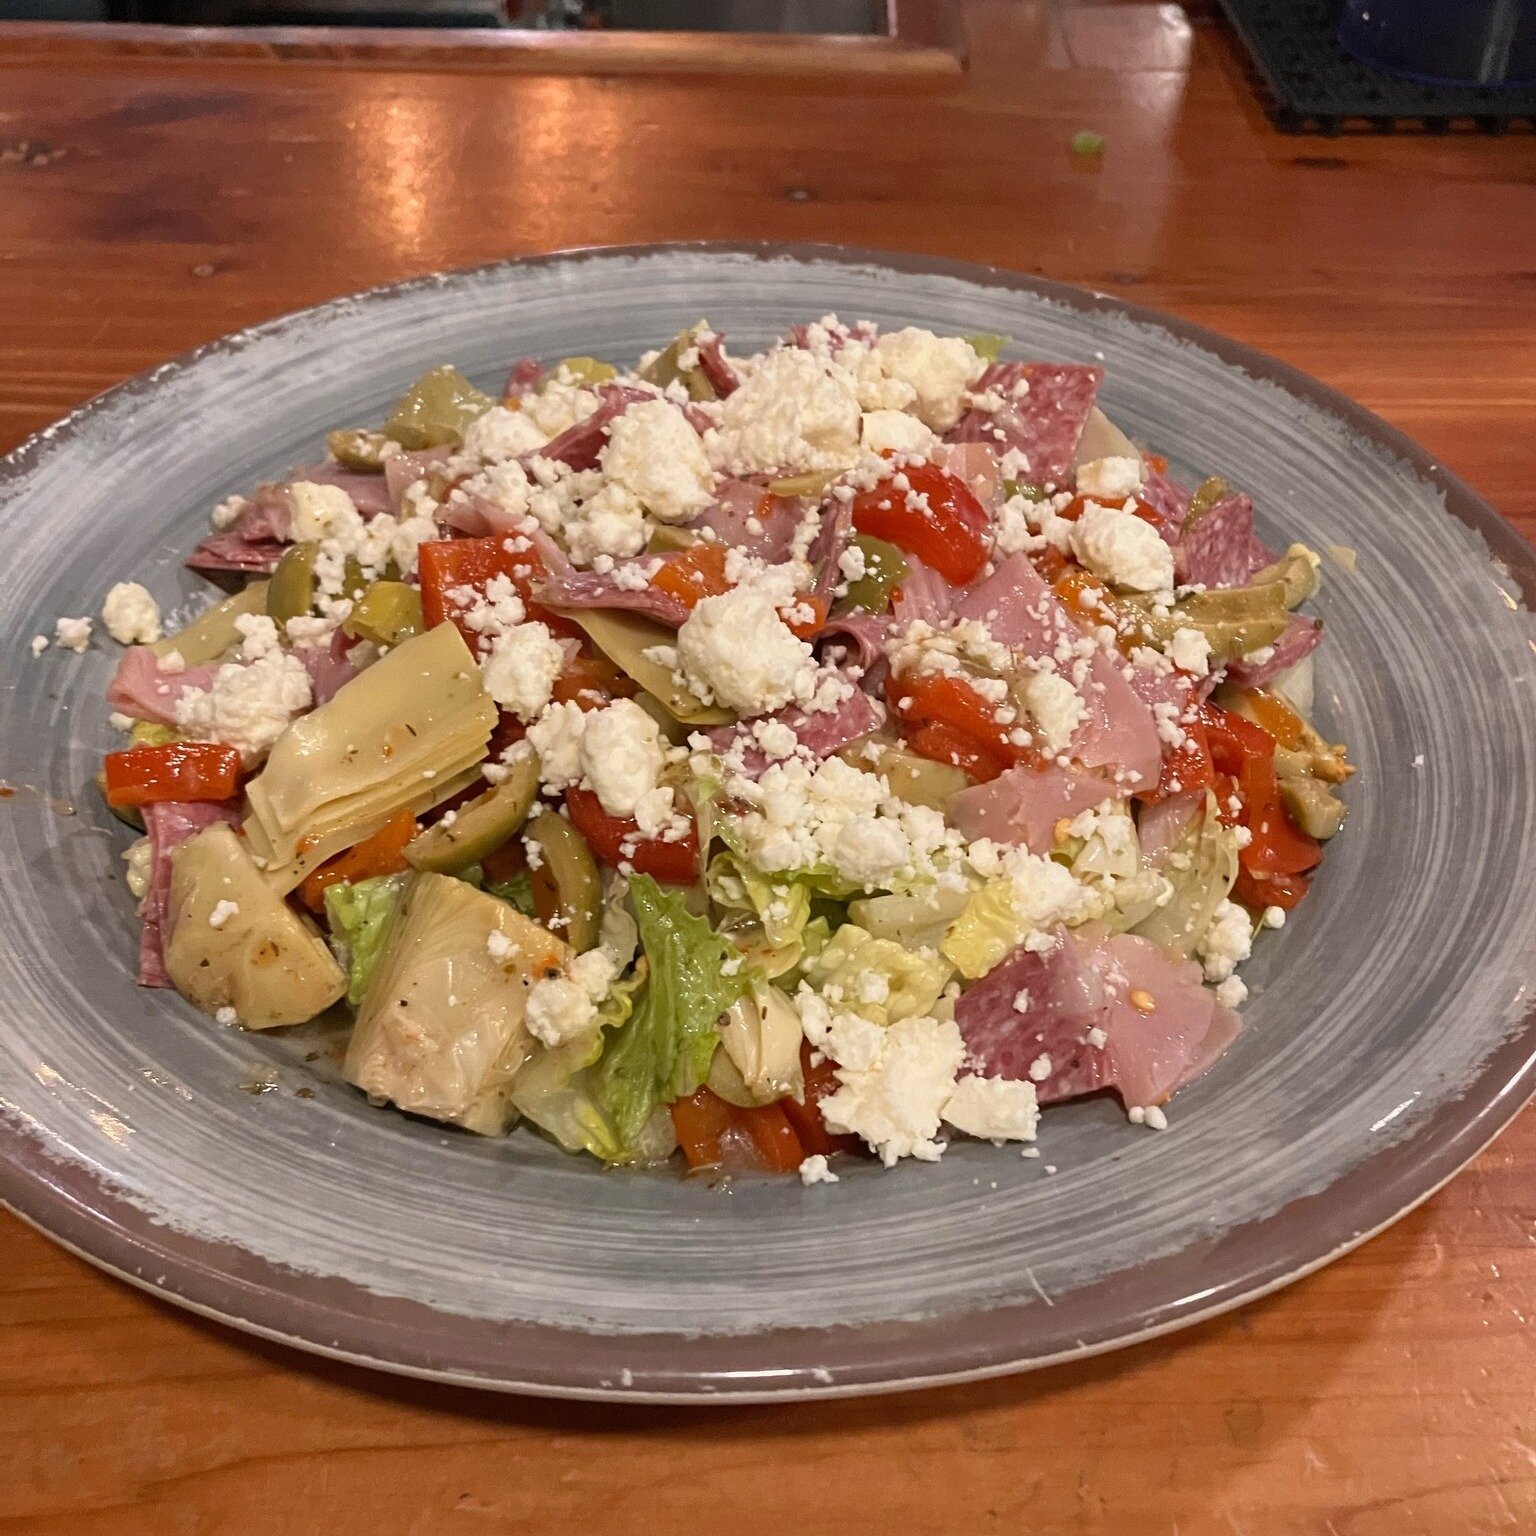 Keeping it fresh on Wednesdays this month with our Italian Antipasto Salad 🇮🇹 Salami, ham, artichokes, mixed olives, roasted red pepper, pepperoncini, tomato and feta are tossed in house dressing over a bed of romaine. Available every Wednesday thi